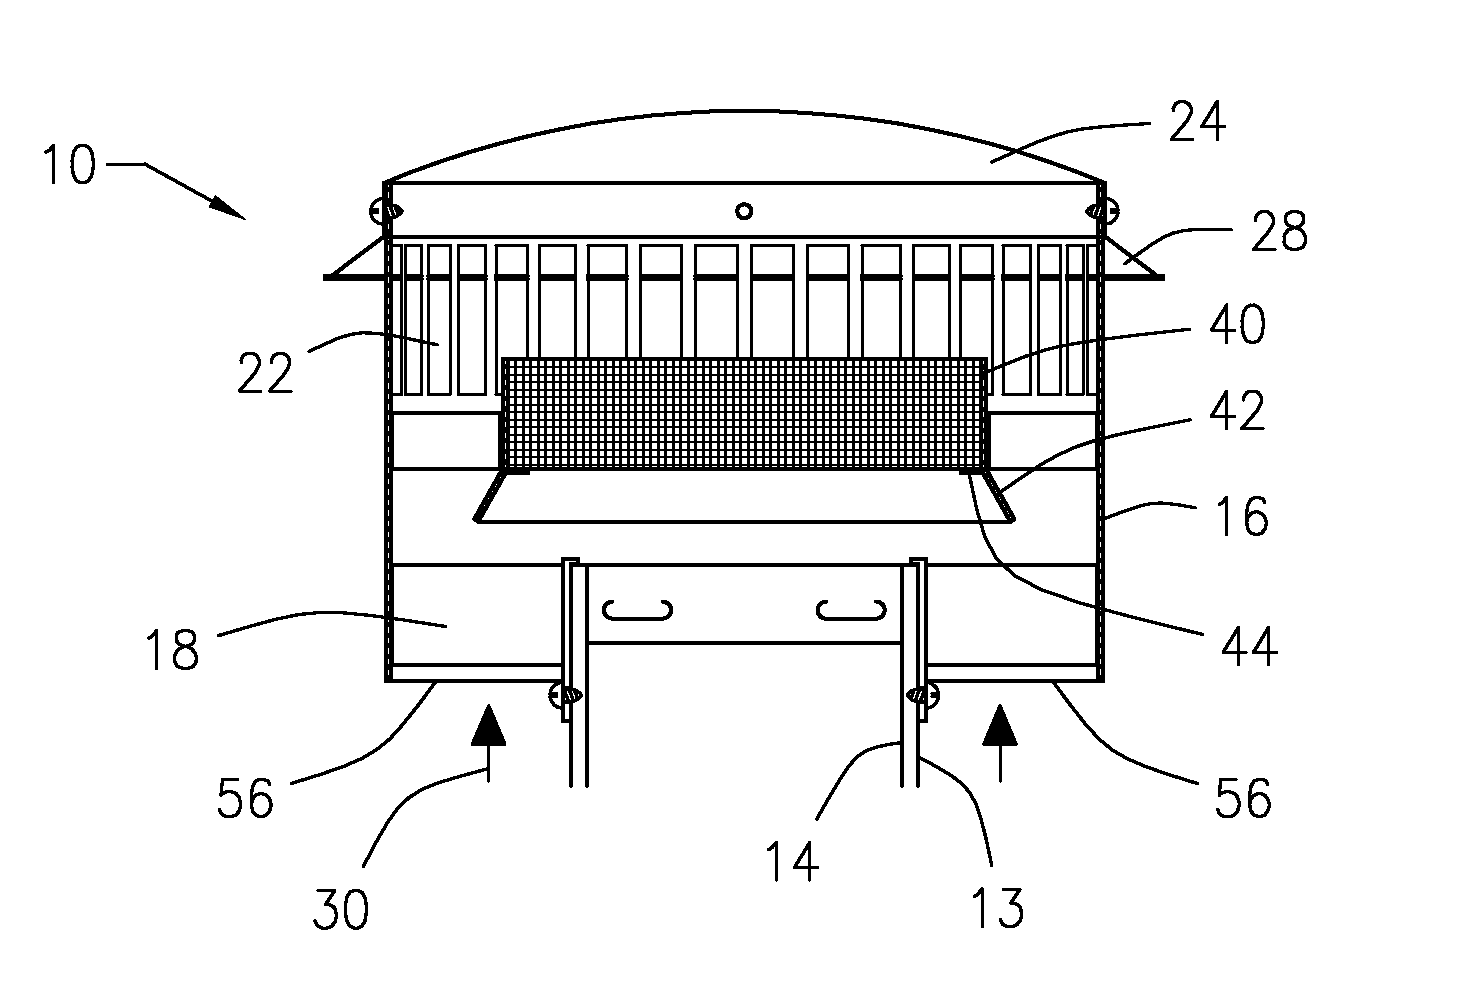 Exhaust flue cap and filter device for a gas fired appliance